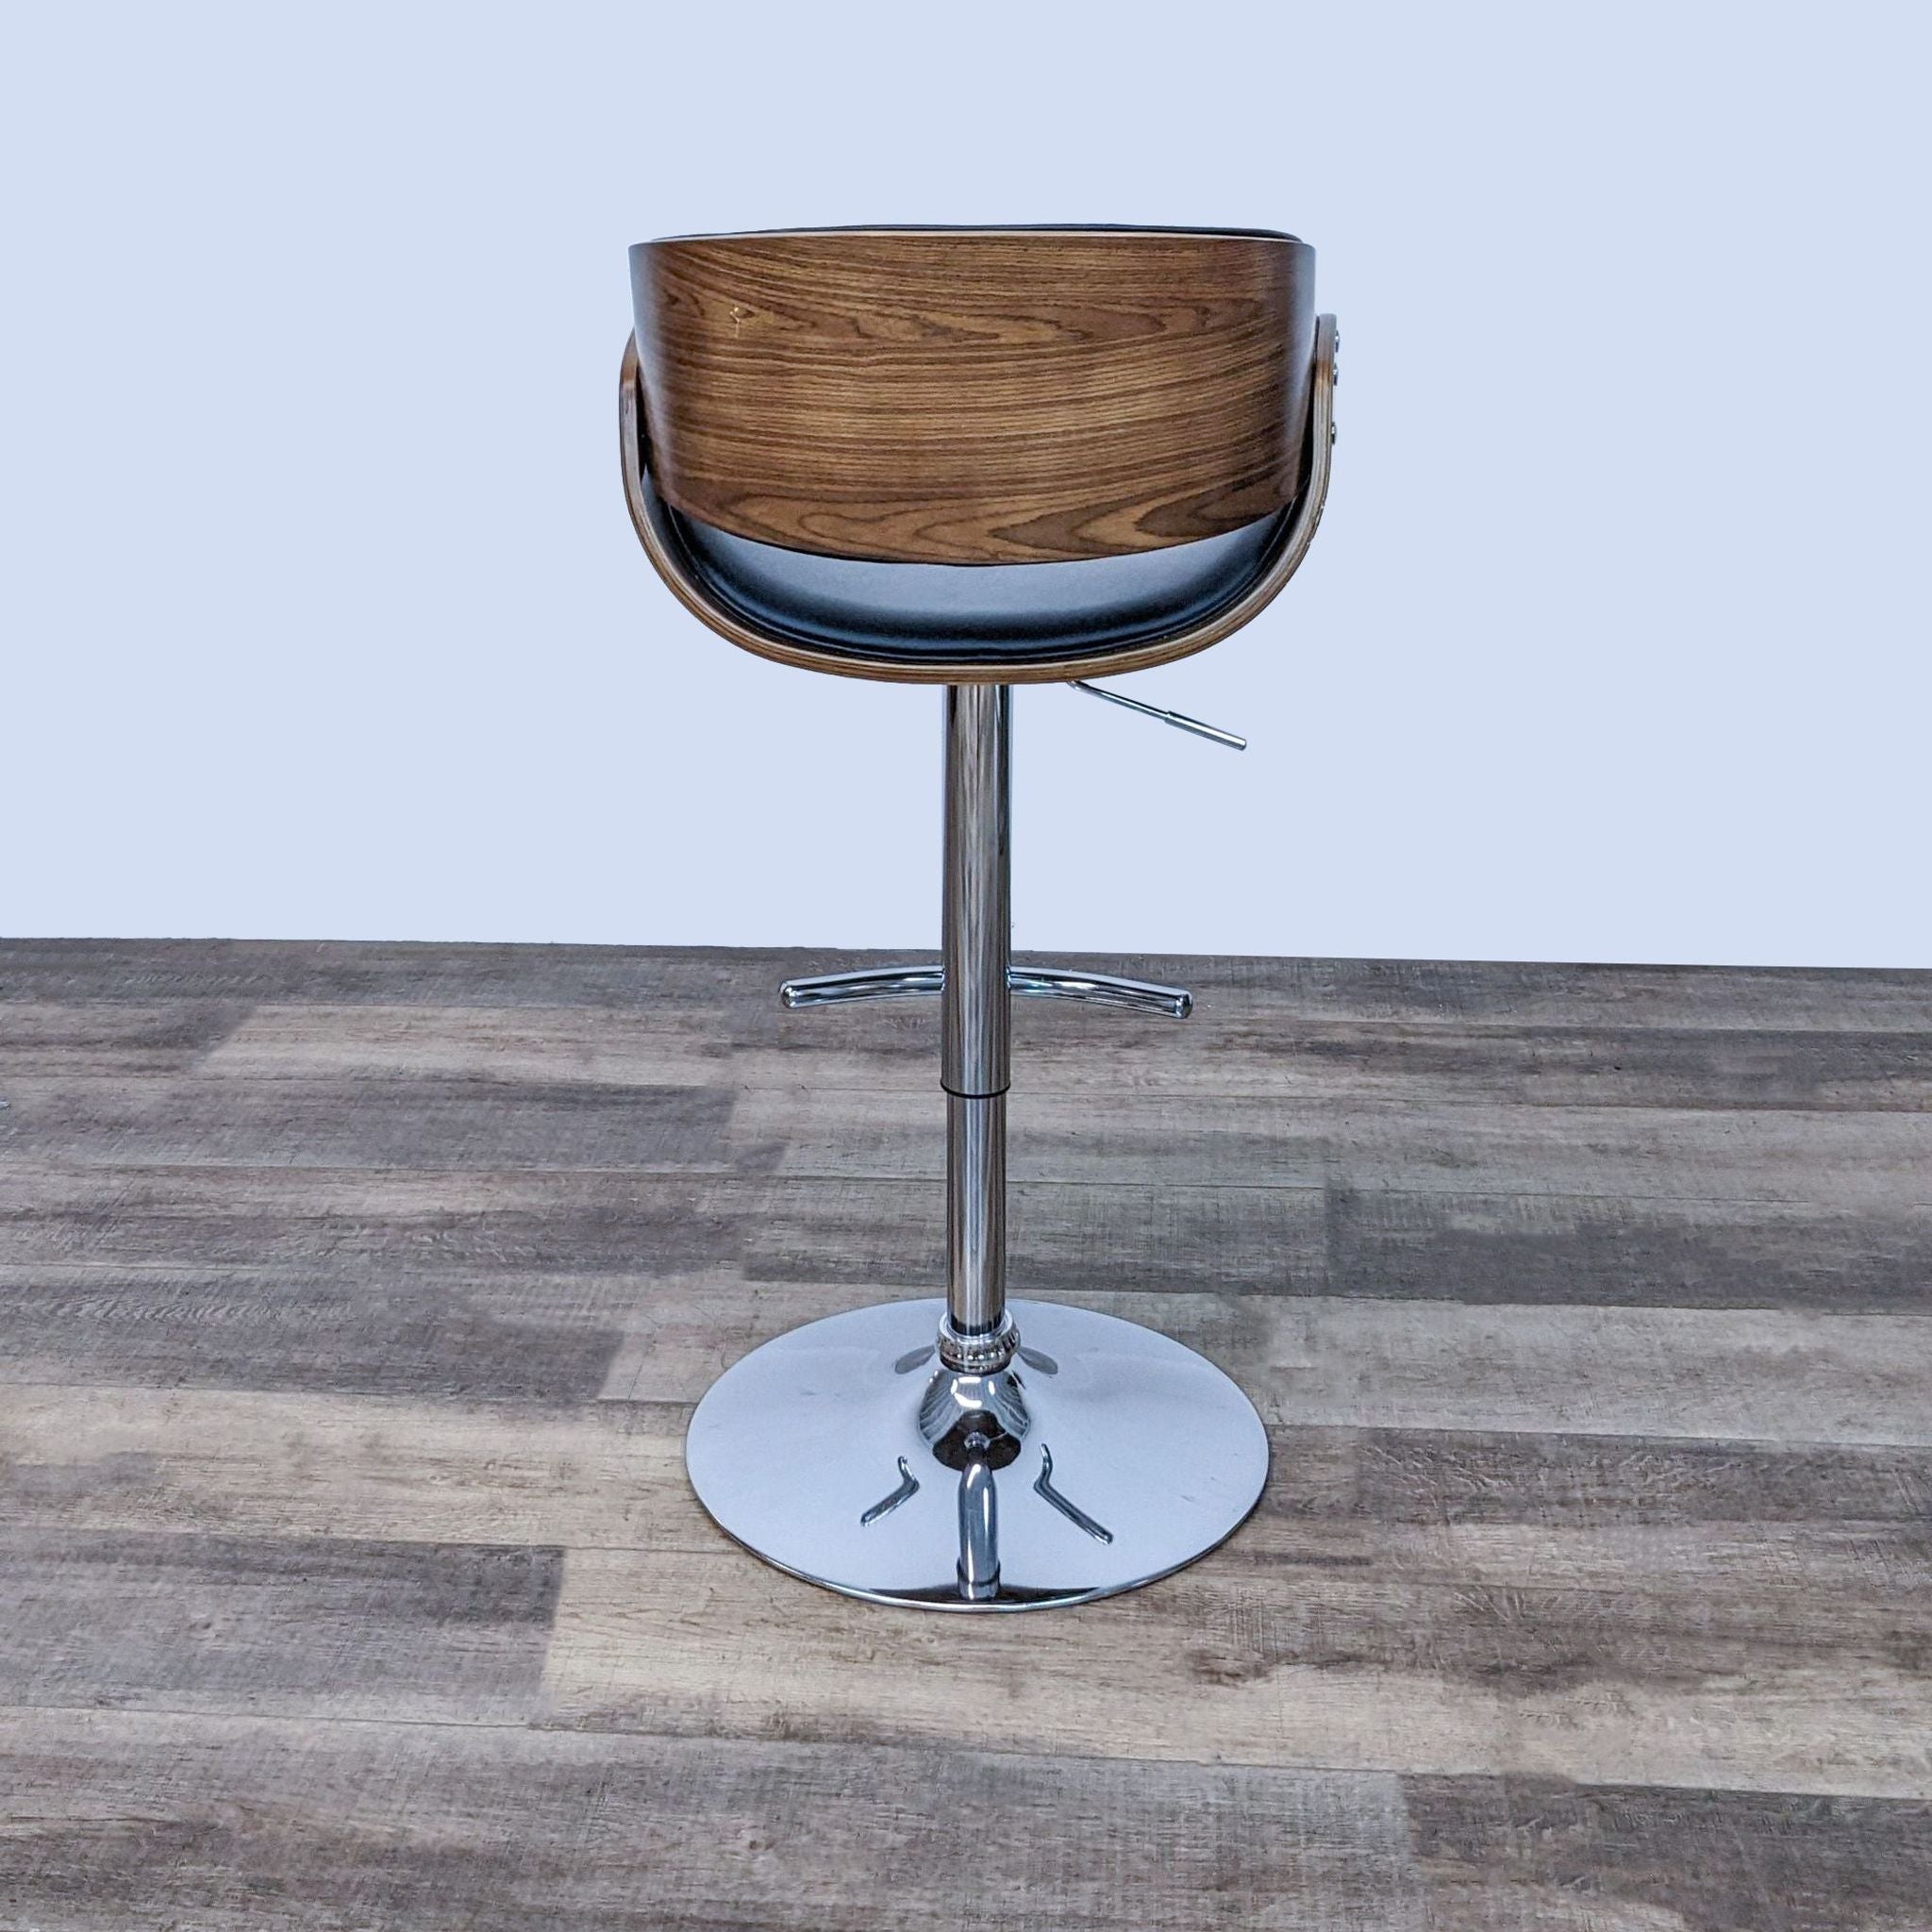 Rear view of Reperch wood finish stool with black padded seat on a sleek chrome base.